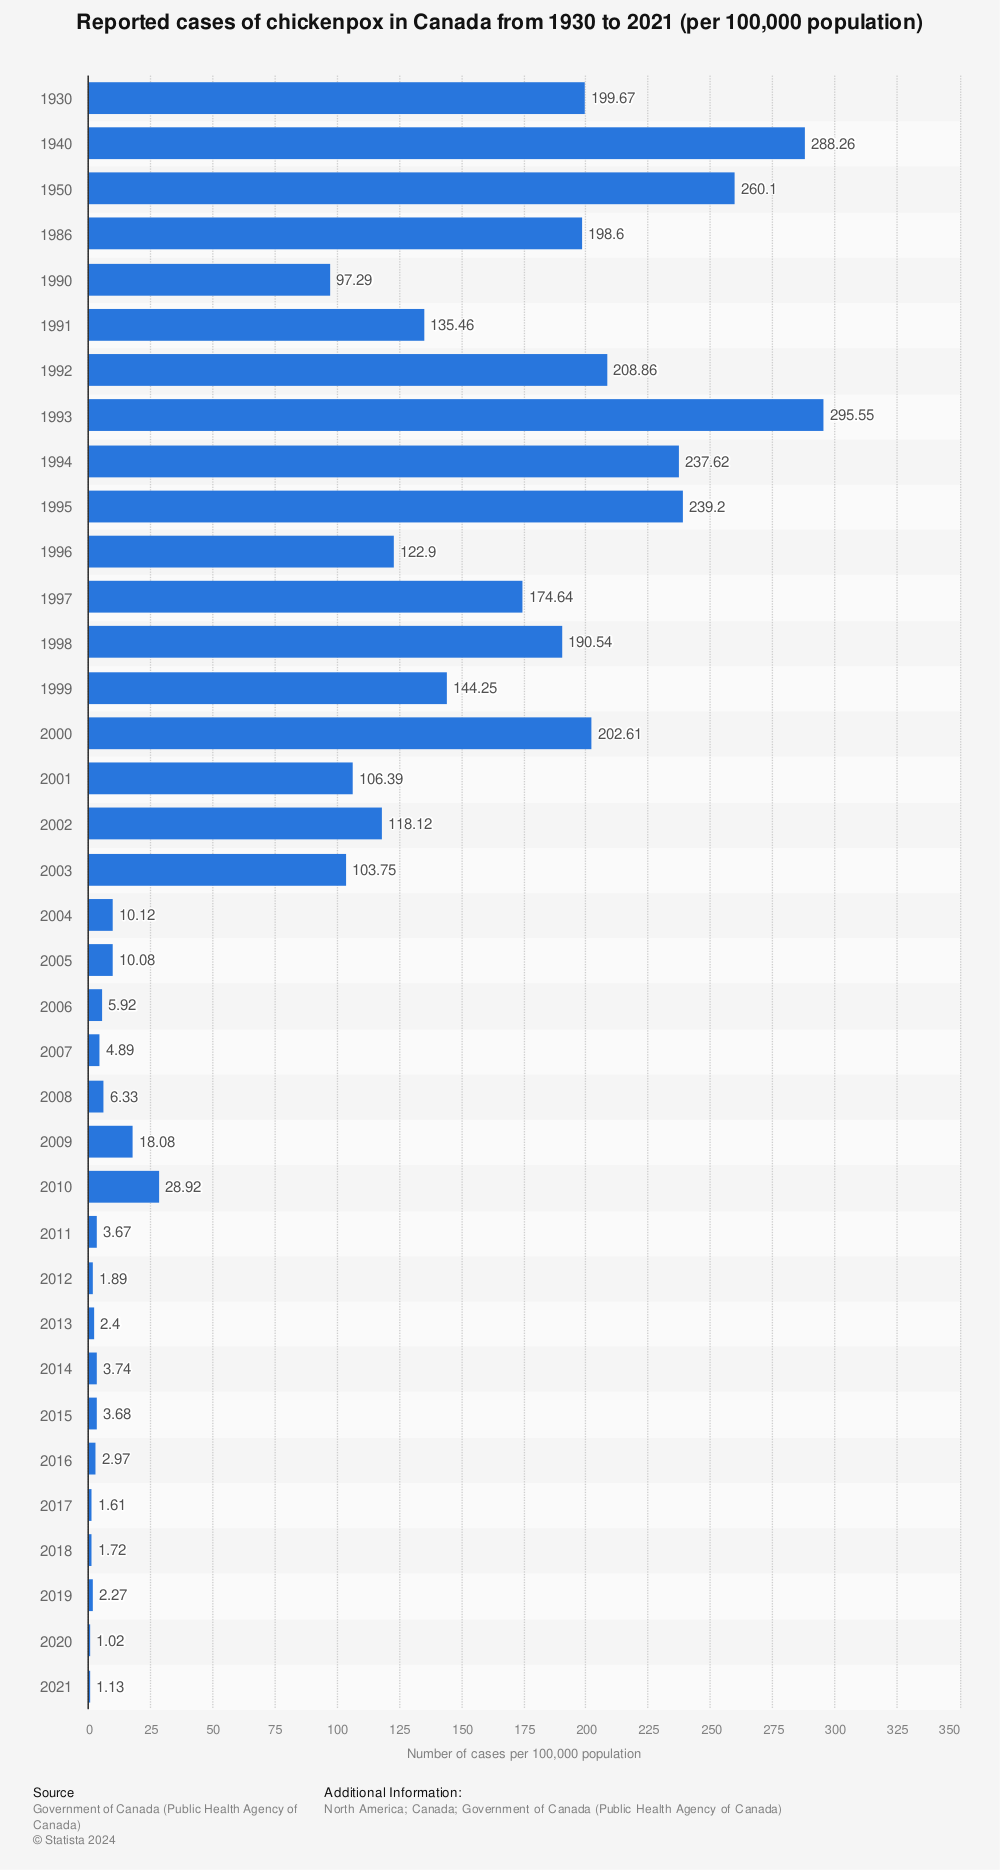 Statistic: Reported cases of chickenpox in Canada from 1930 to 2019 (per 100,000 population) | Statista